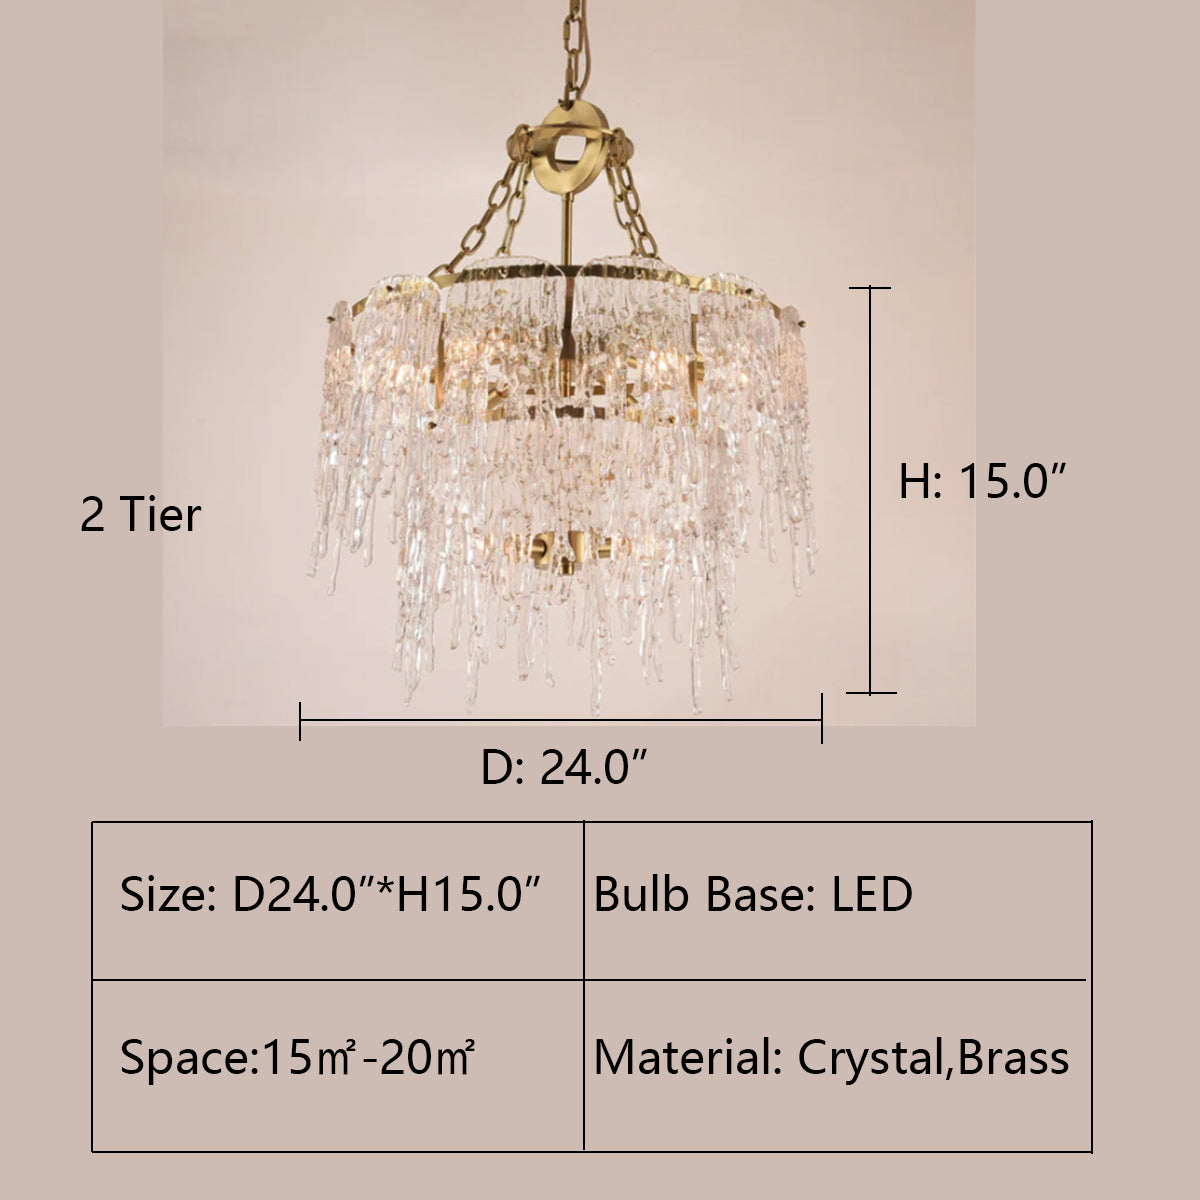 2Tier: D24.0"*H15.0" Aletta Melting Drop Crystal Glass Chandelier,chandelier,chandeliers,pendant,tiers,laters,multi-tier,multi-layer,oversized,huge,big,large,extra large,crystal,brass,Round,ceiling,living room,dining room,bedroom,foyer,stairs,entrys,hallway